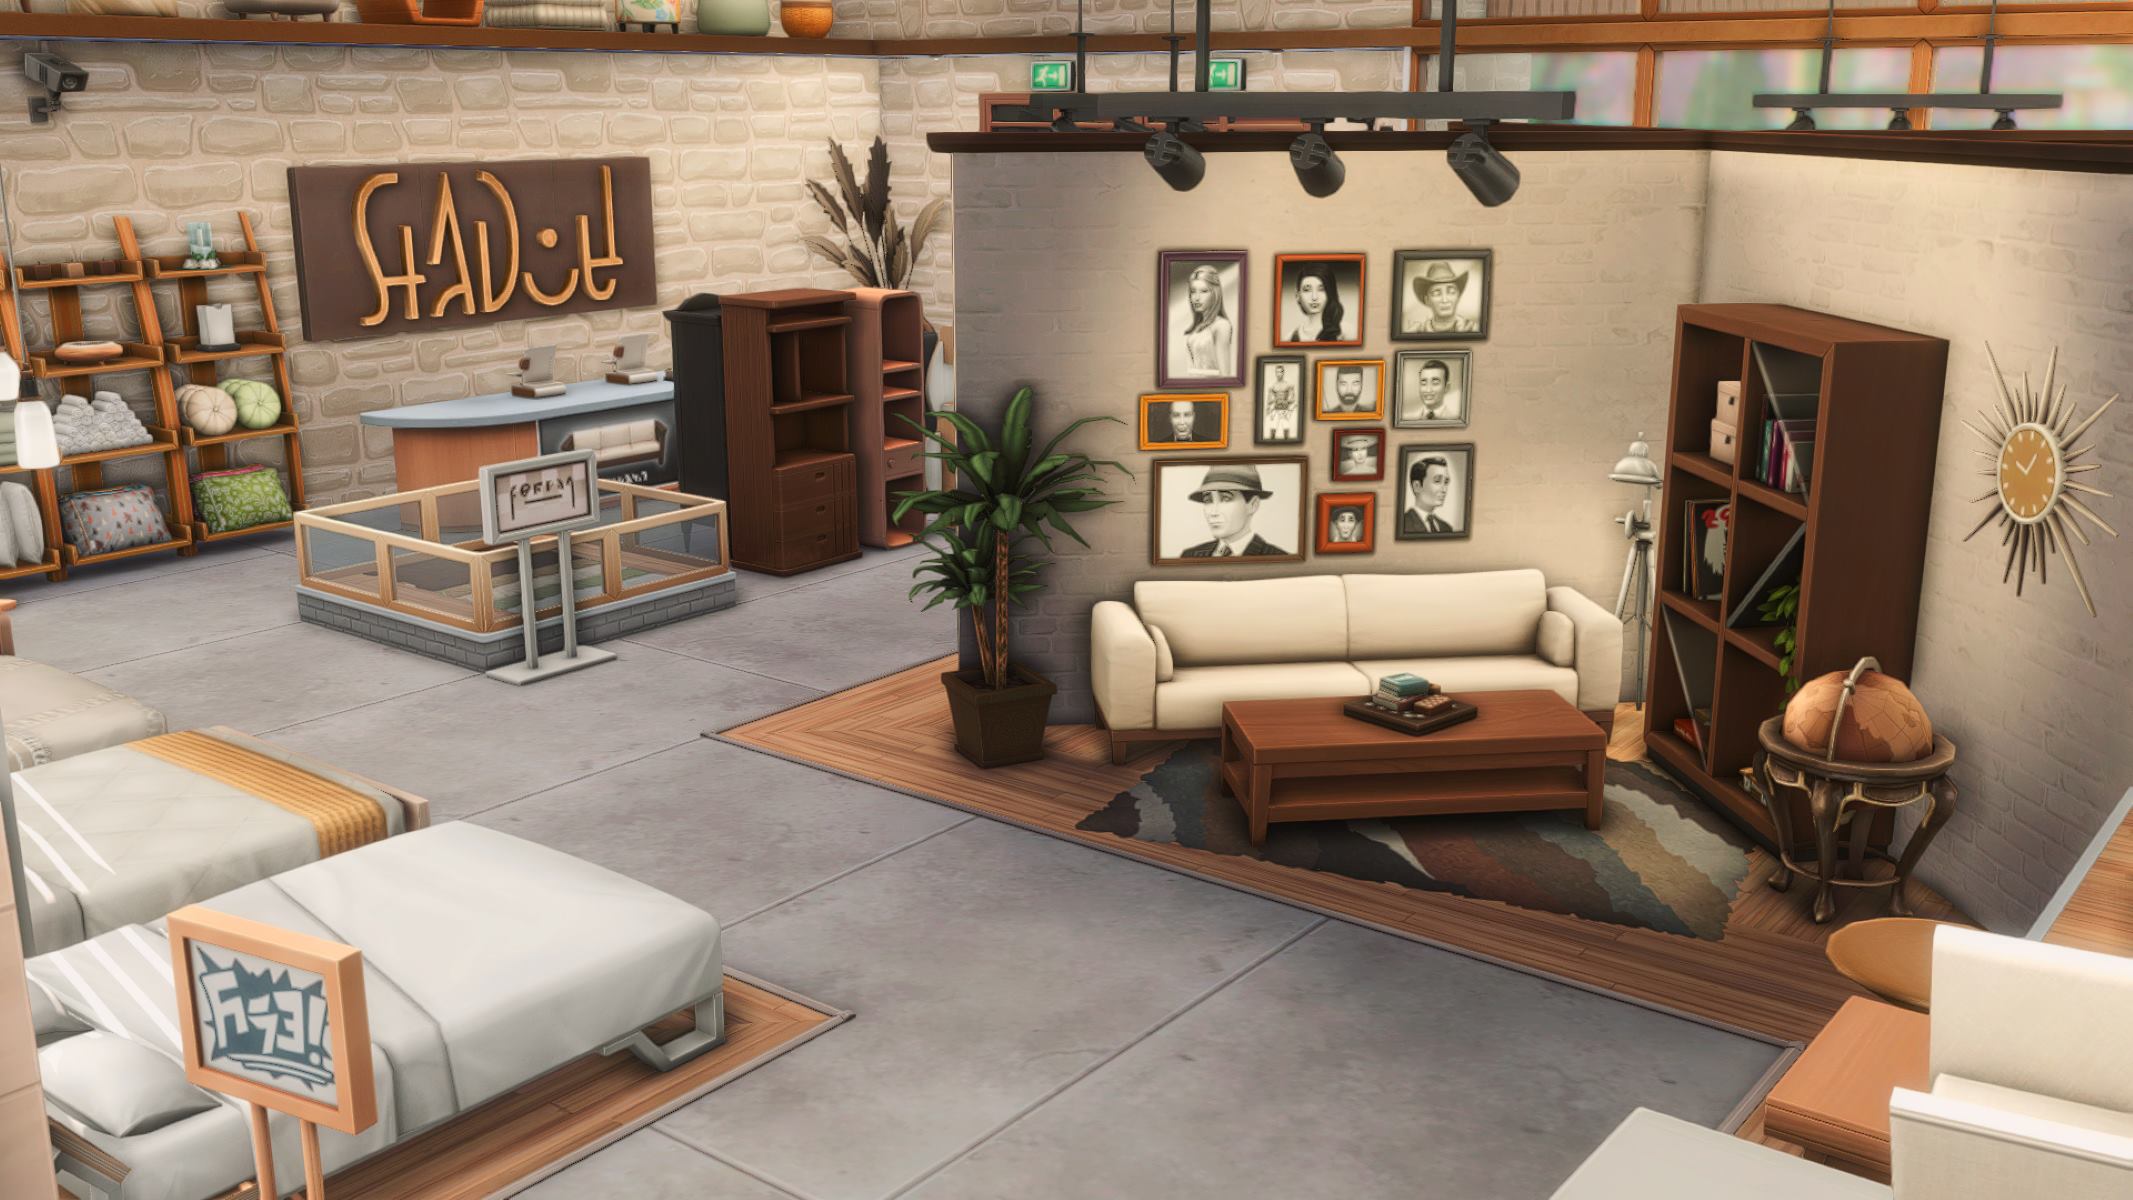 The Ultimate Sims 4 Furniture Package For Your Entire House - No Room Left Unstyled!